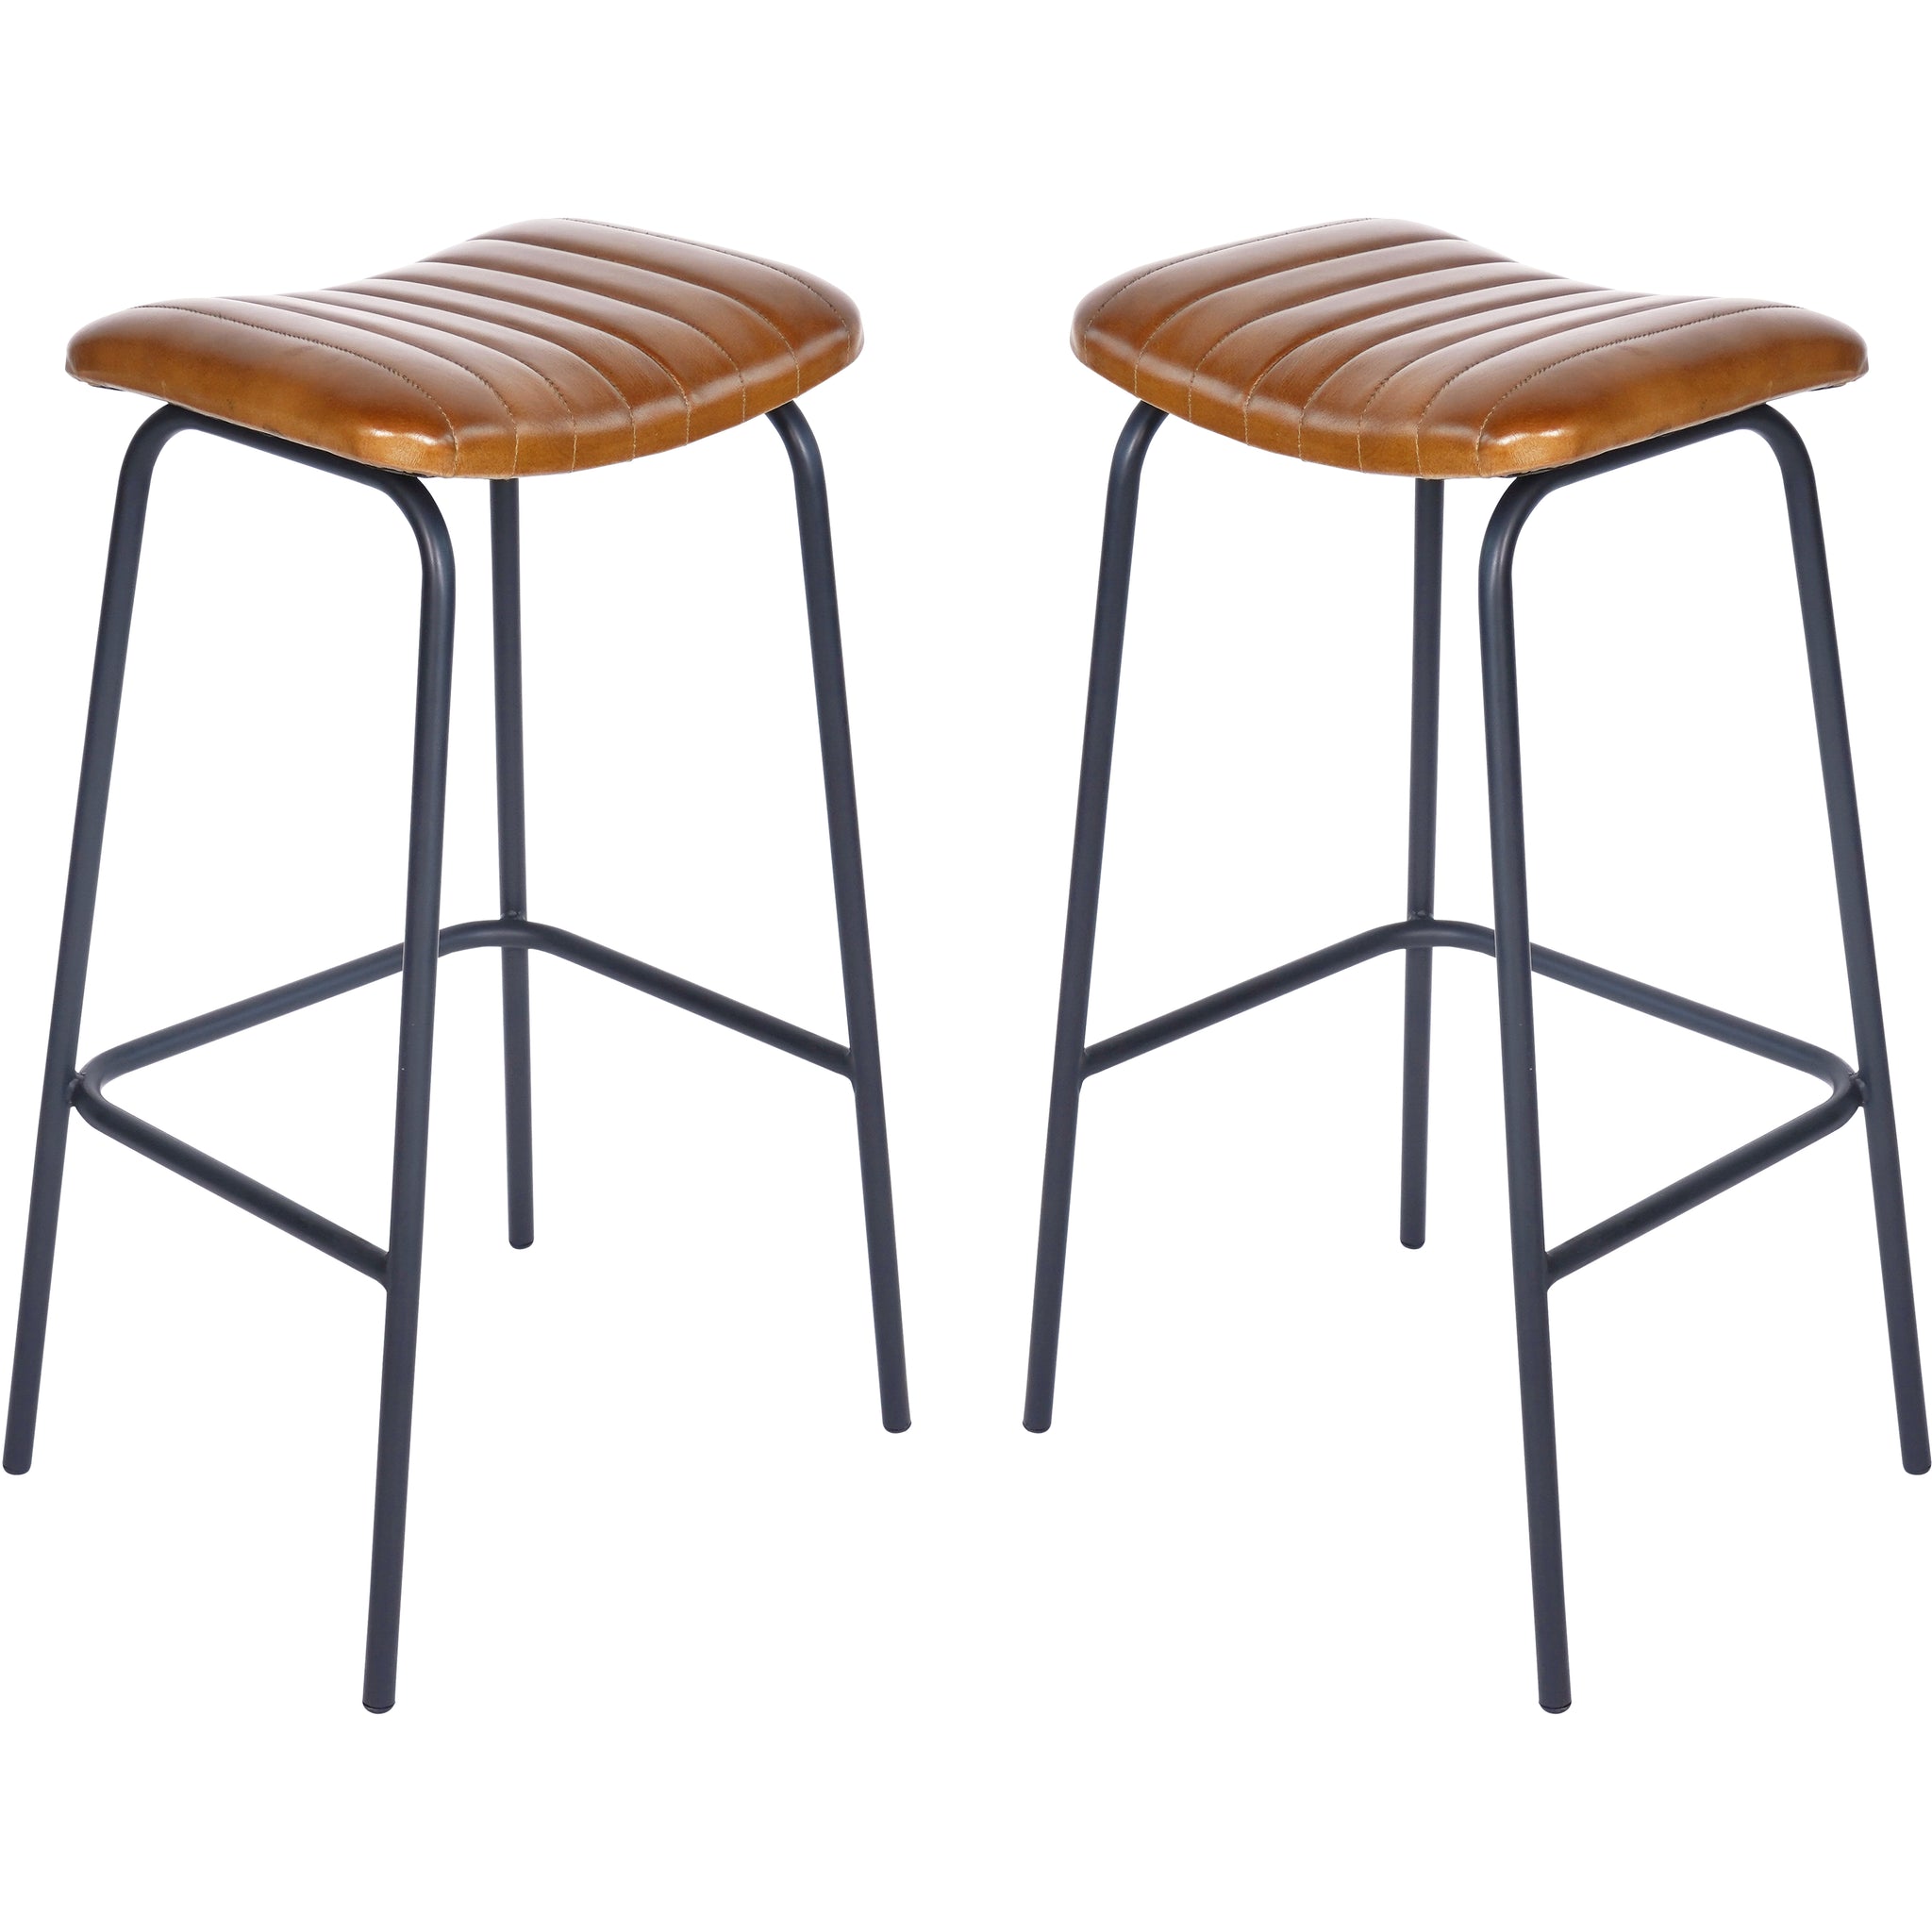 Set of 2 Remi Leather Bar Stools in Cognac